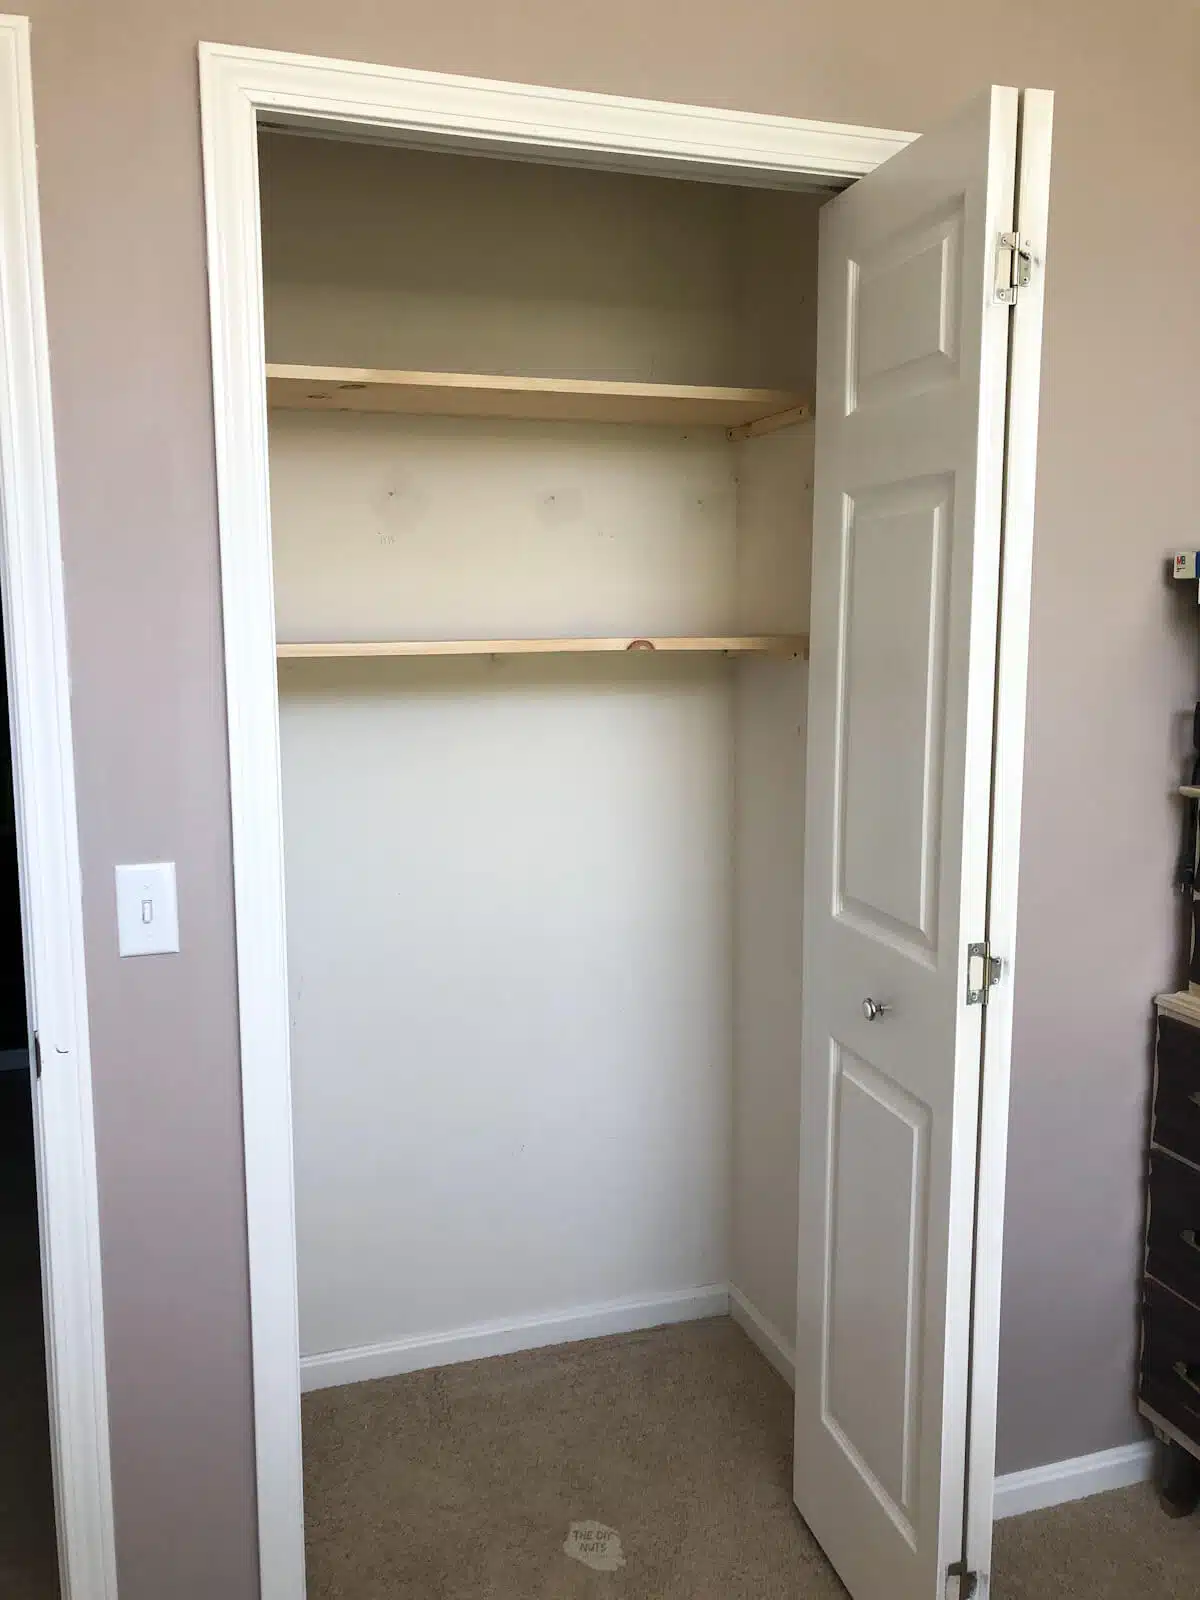 two wooden shelves in small closet installed on homemade wooden shelf brackets.